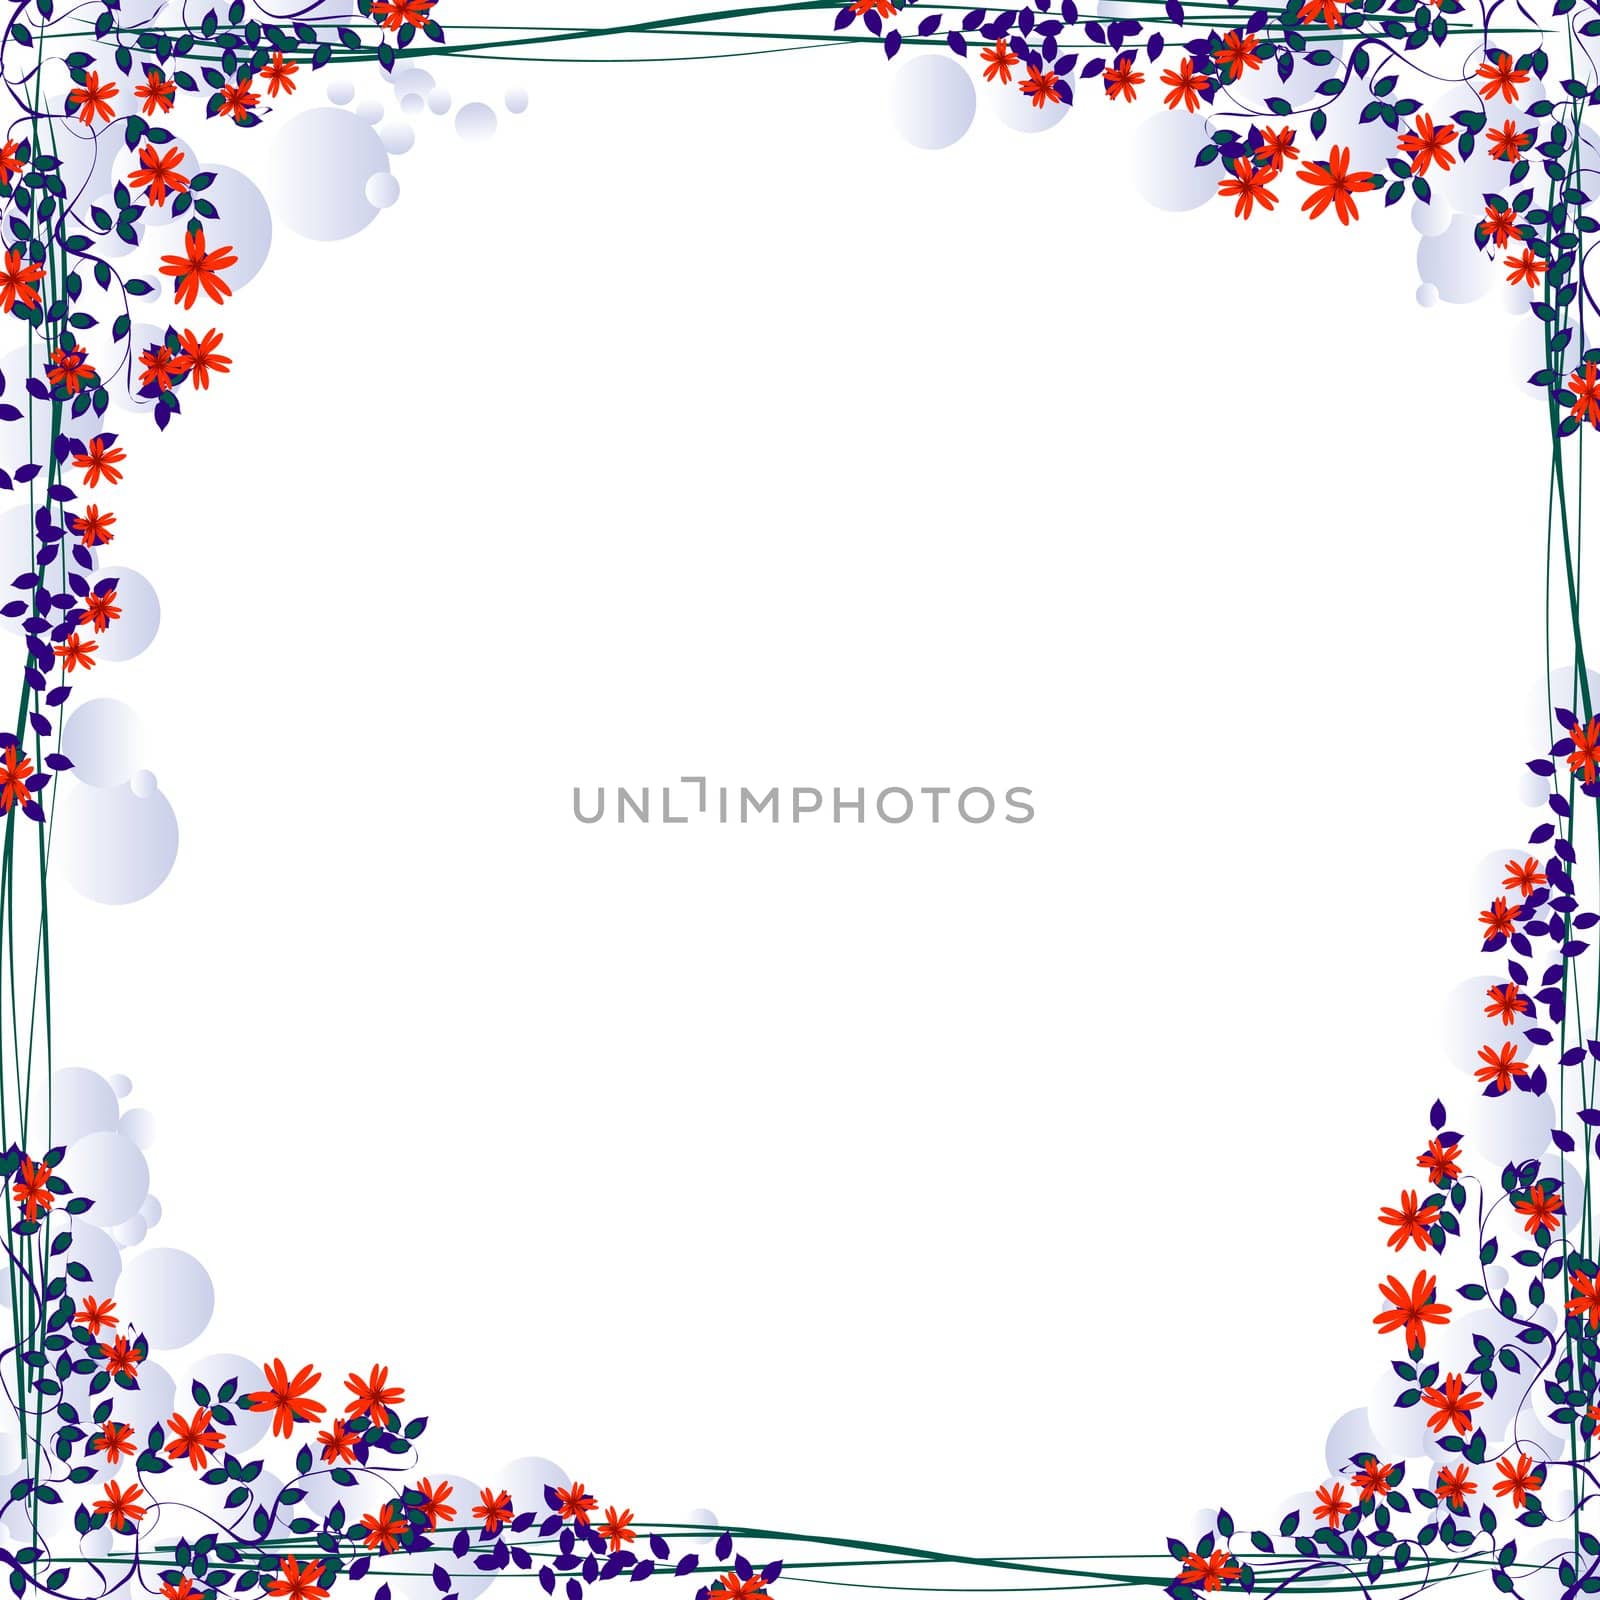 Beautiful frame with flowers and bubbles for text or photography